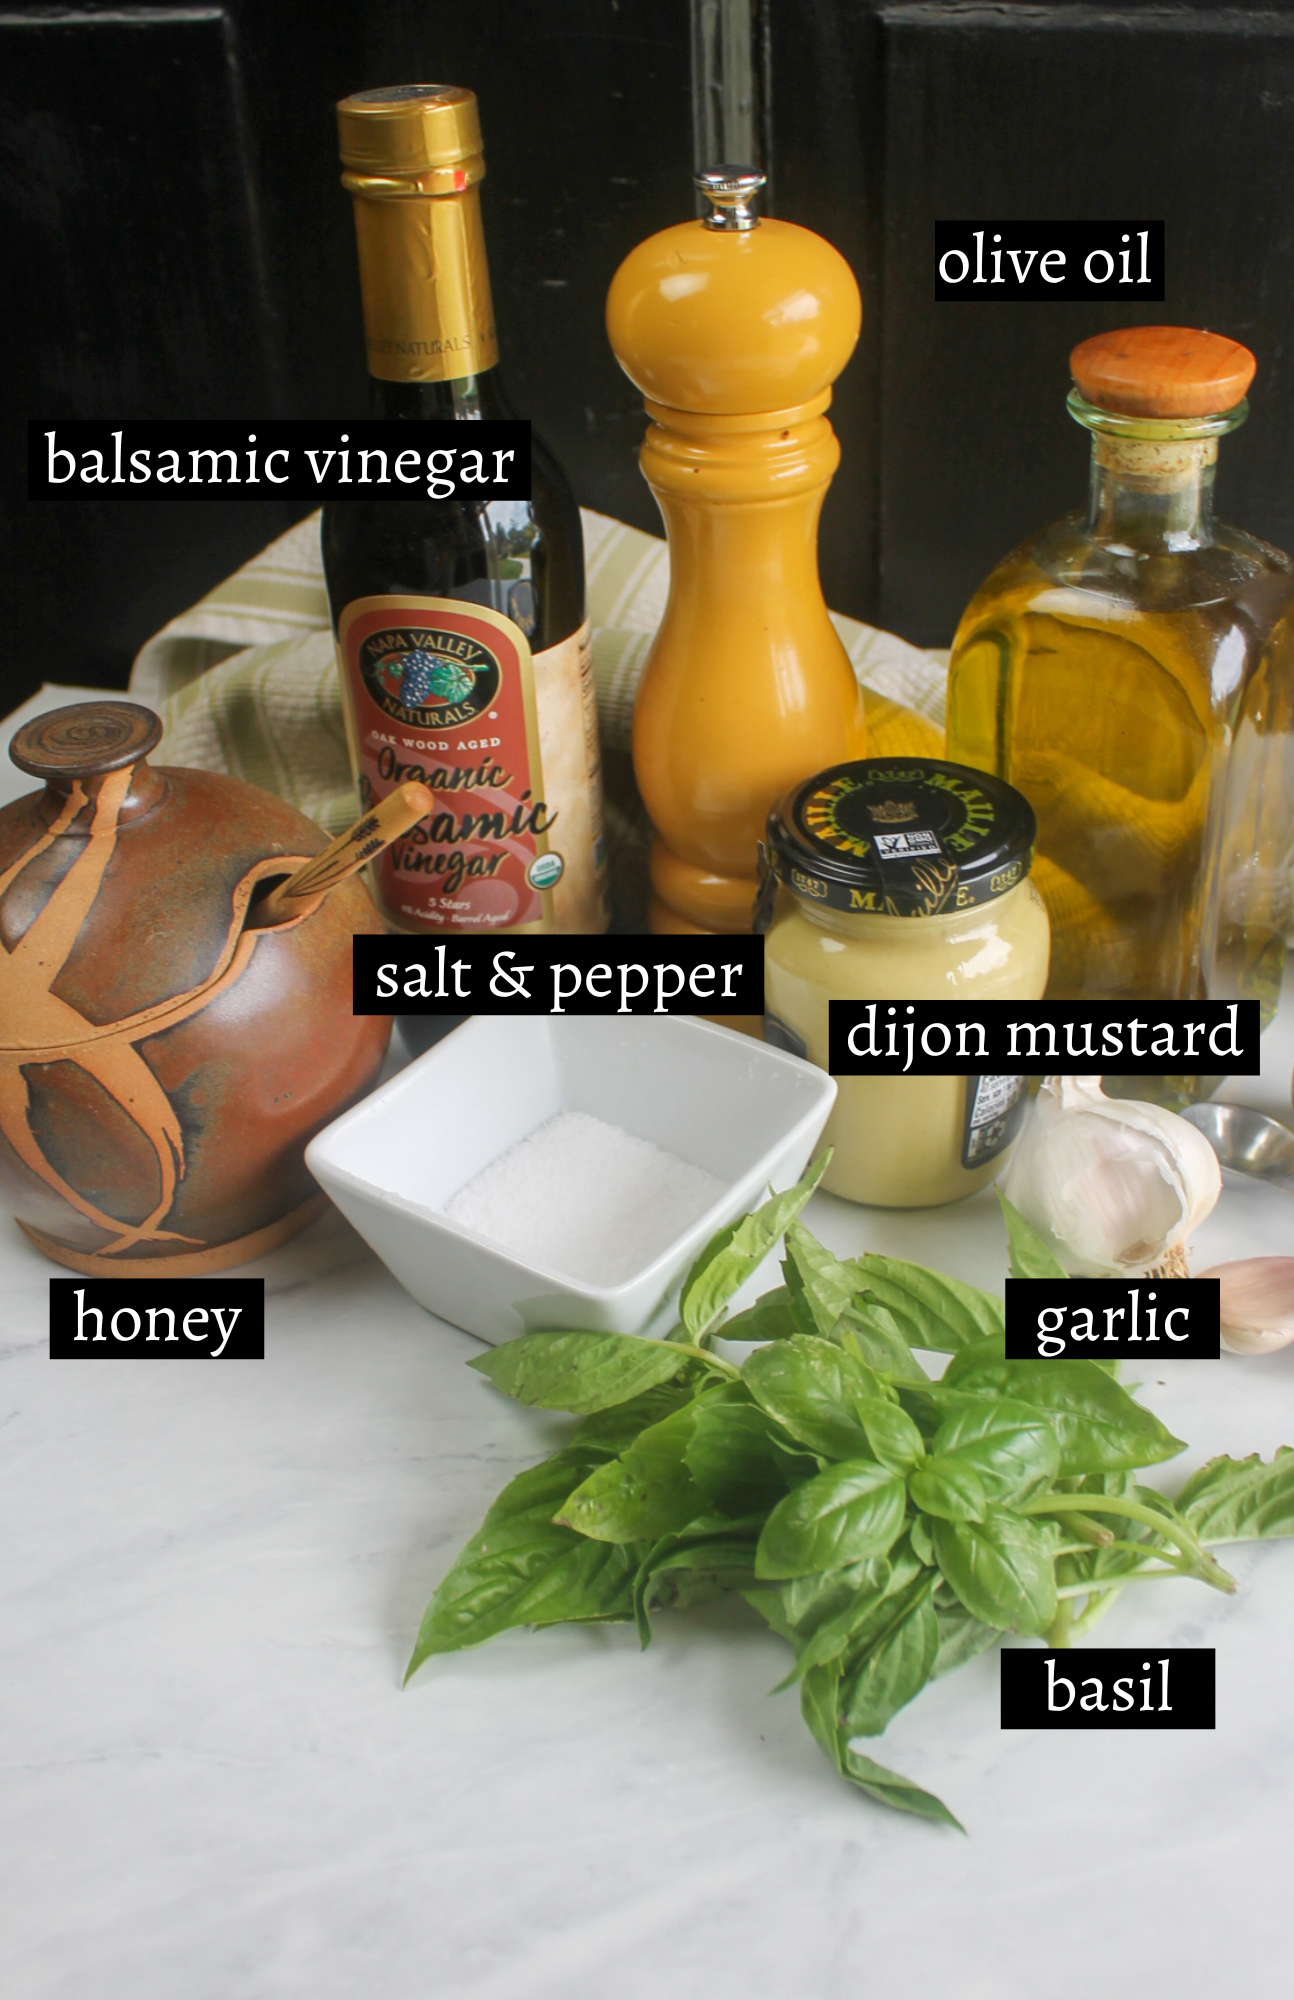 Labeled ingredients for basil balsamic dressing.